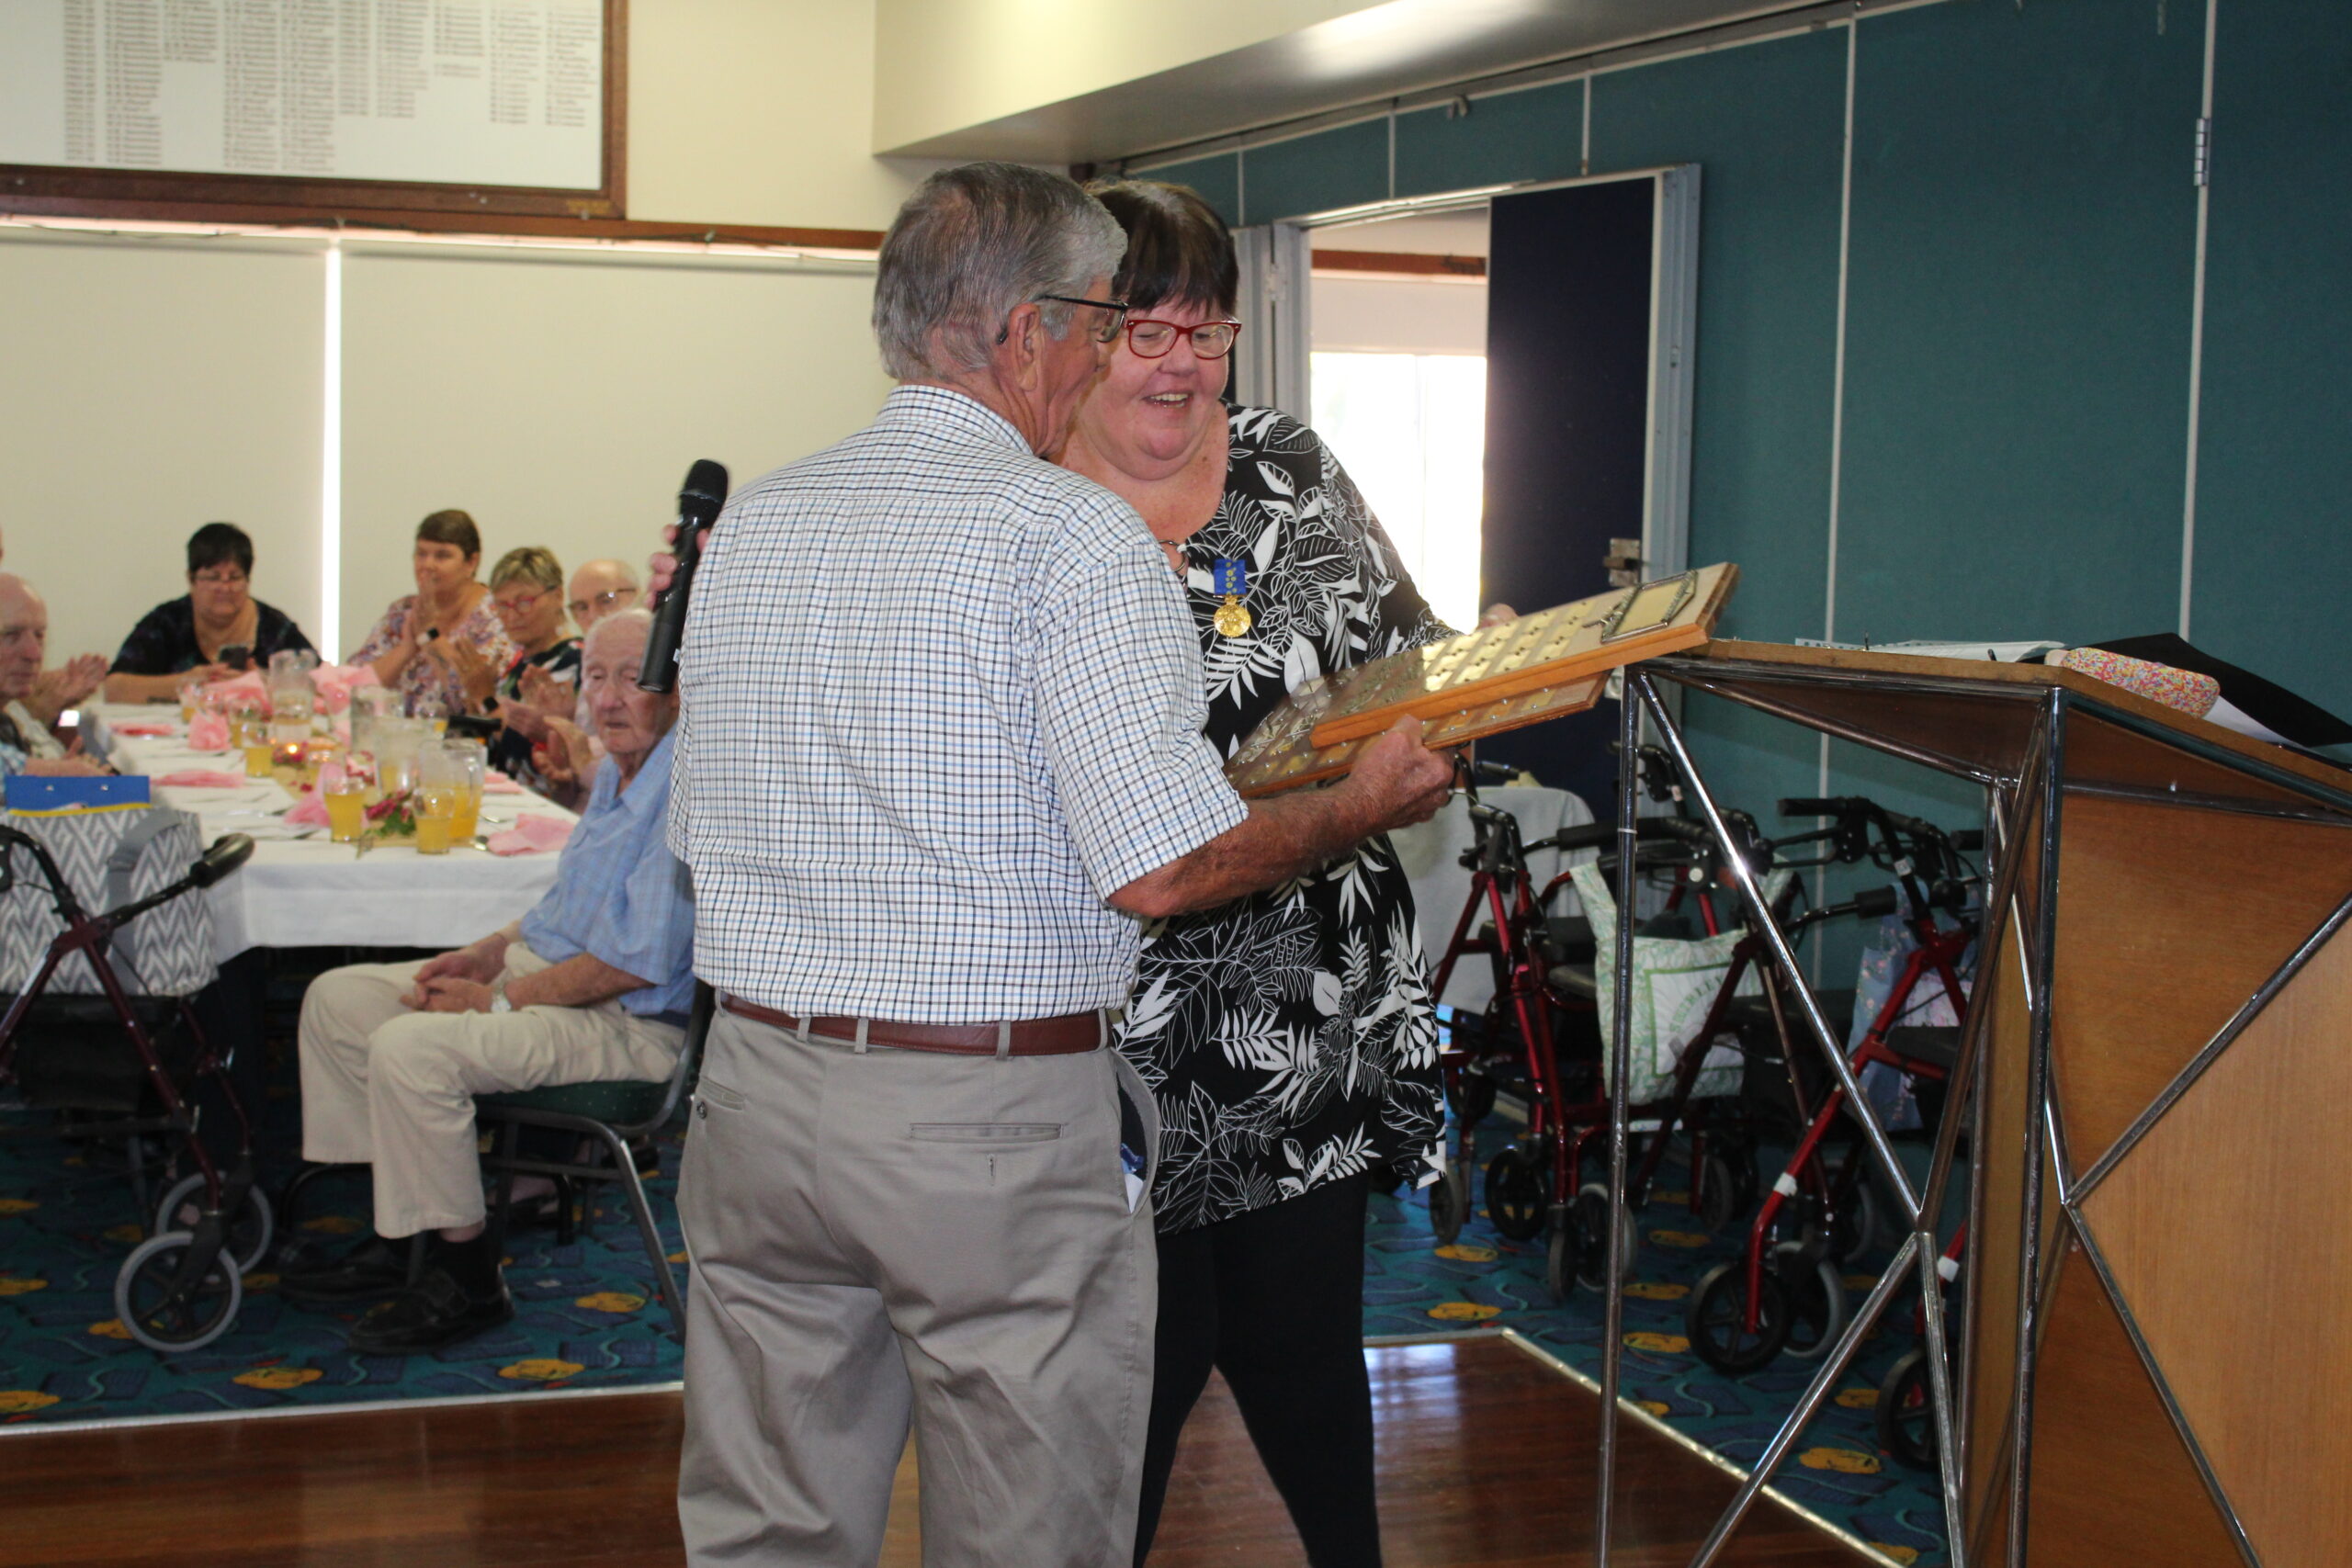 Kevin Horne accepting his award from Julie Dowleans (OAM).